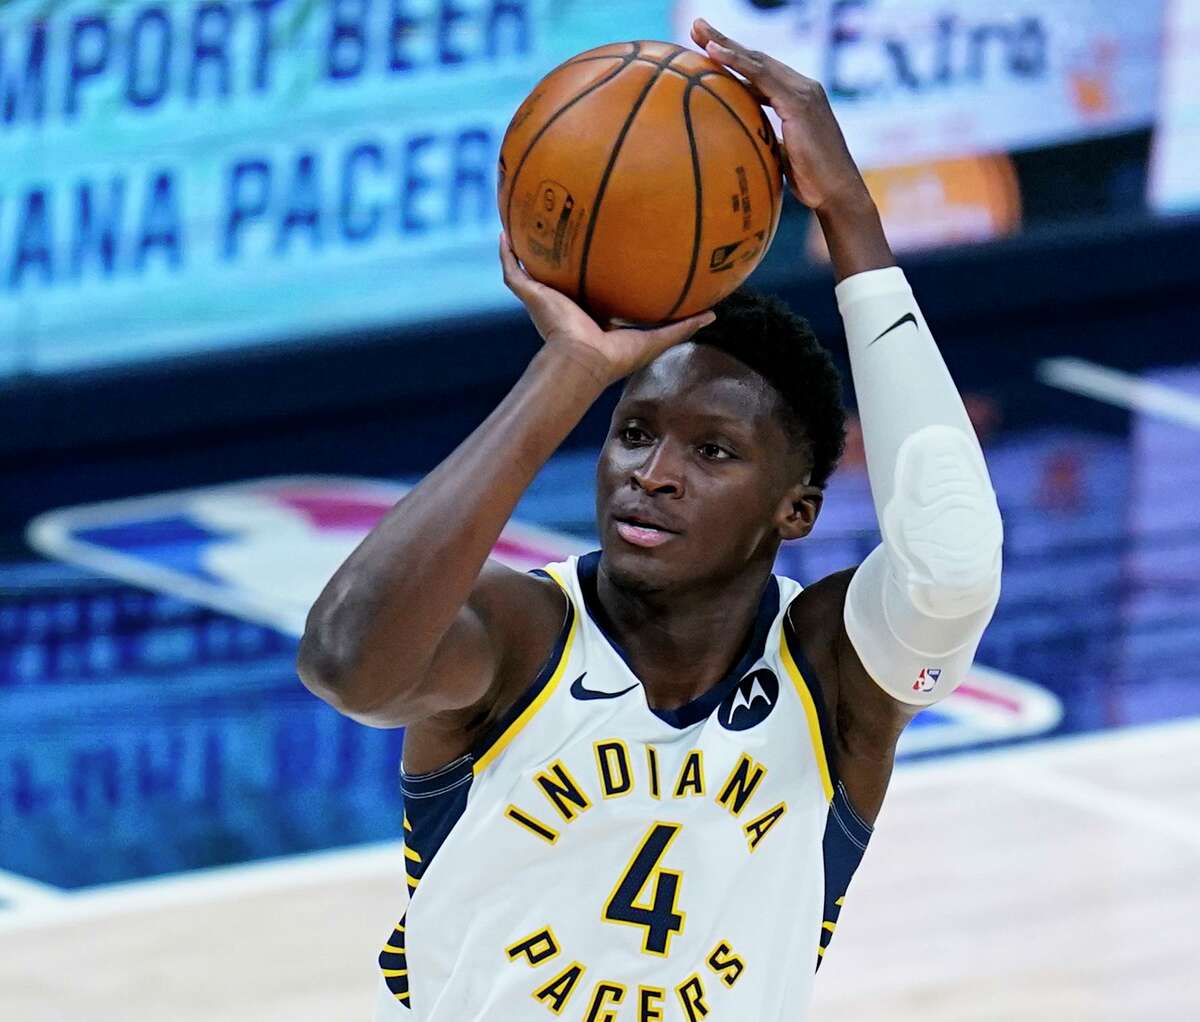 Pacers guard Victor Oladipo playing like an All-Star — again